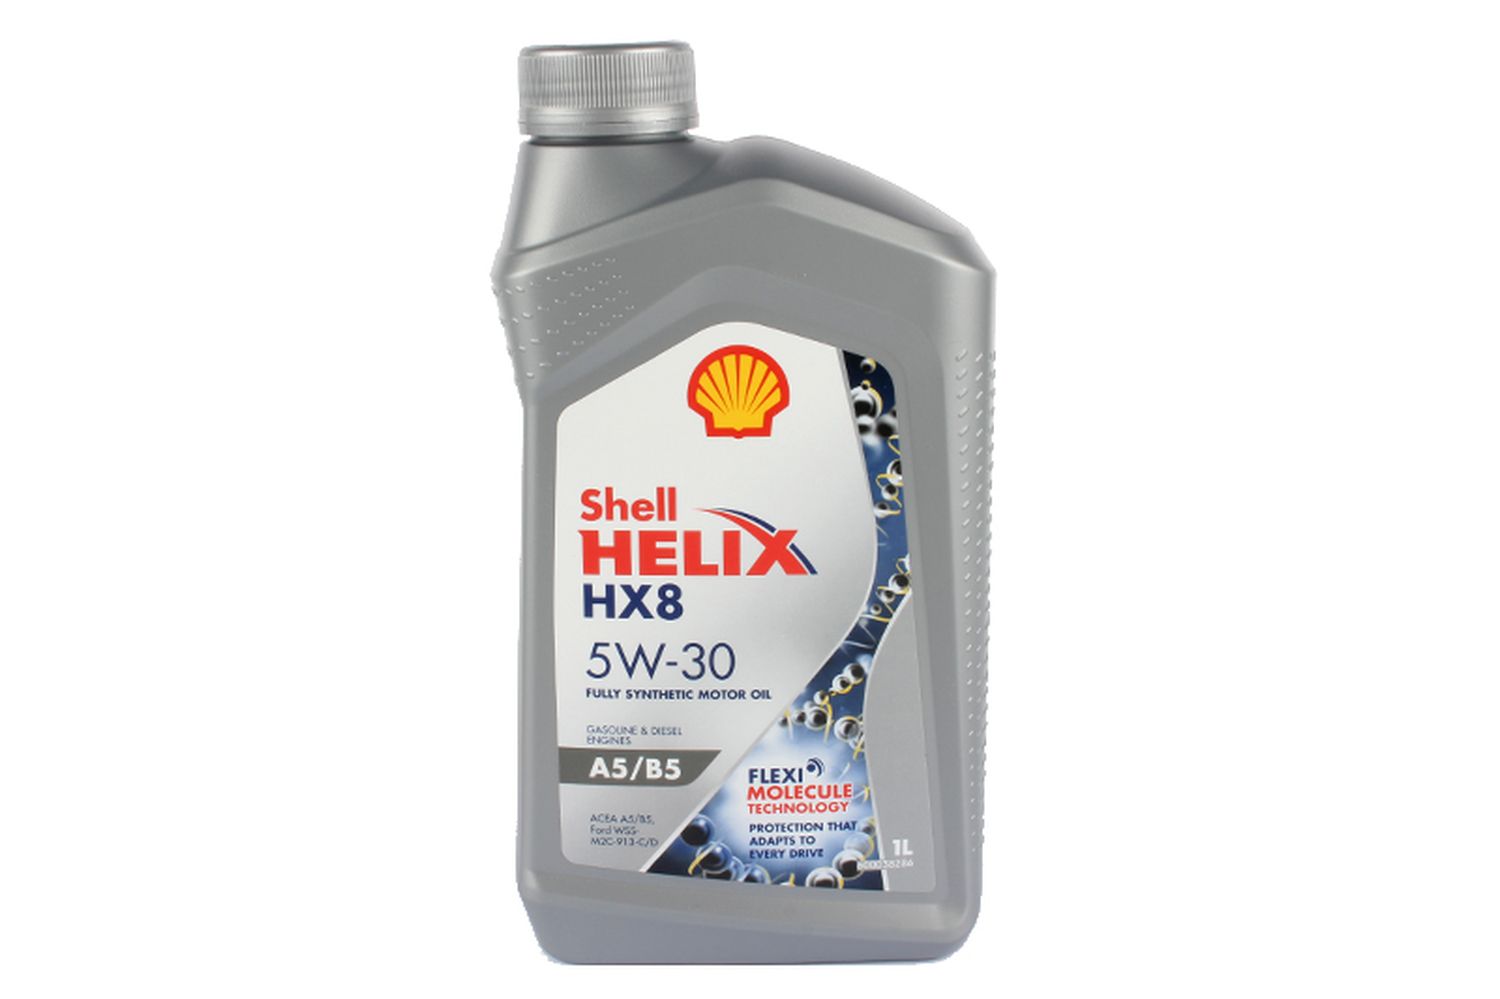 Shell моторное 5w30 hx8. Масло моторное Shell Helix hx8 Synthetic 5w-30. Shell Helix hx8 ect 5w-40. Масло моторное Shell Helix hx8 Synthetic 5w-40, 1l, 4l.